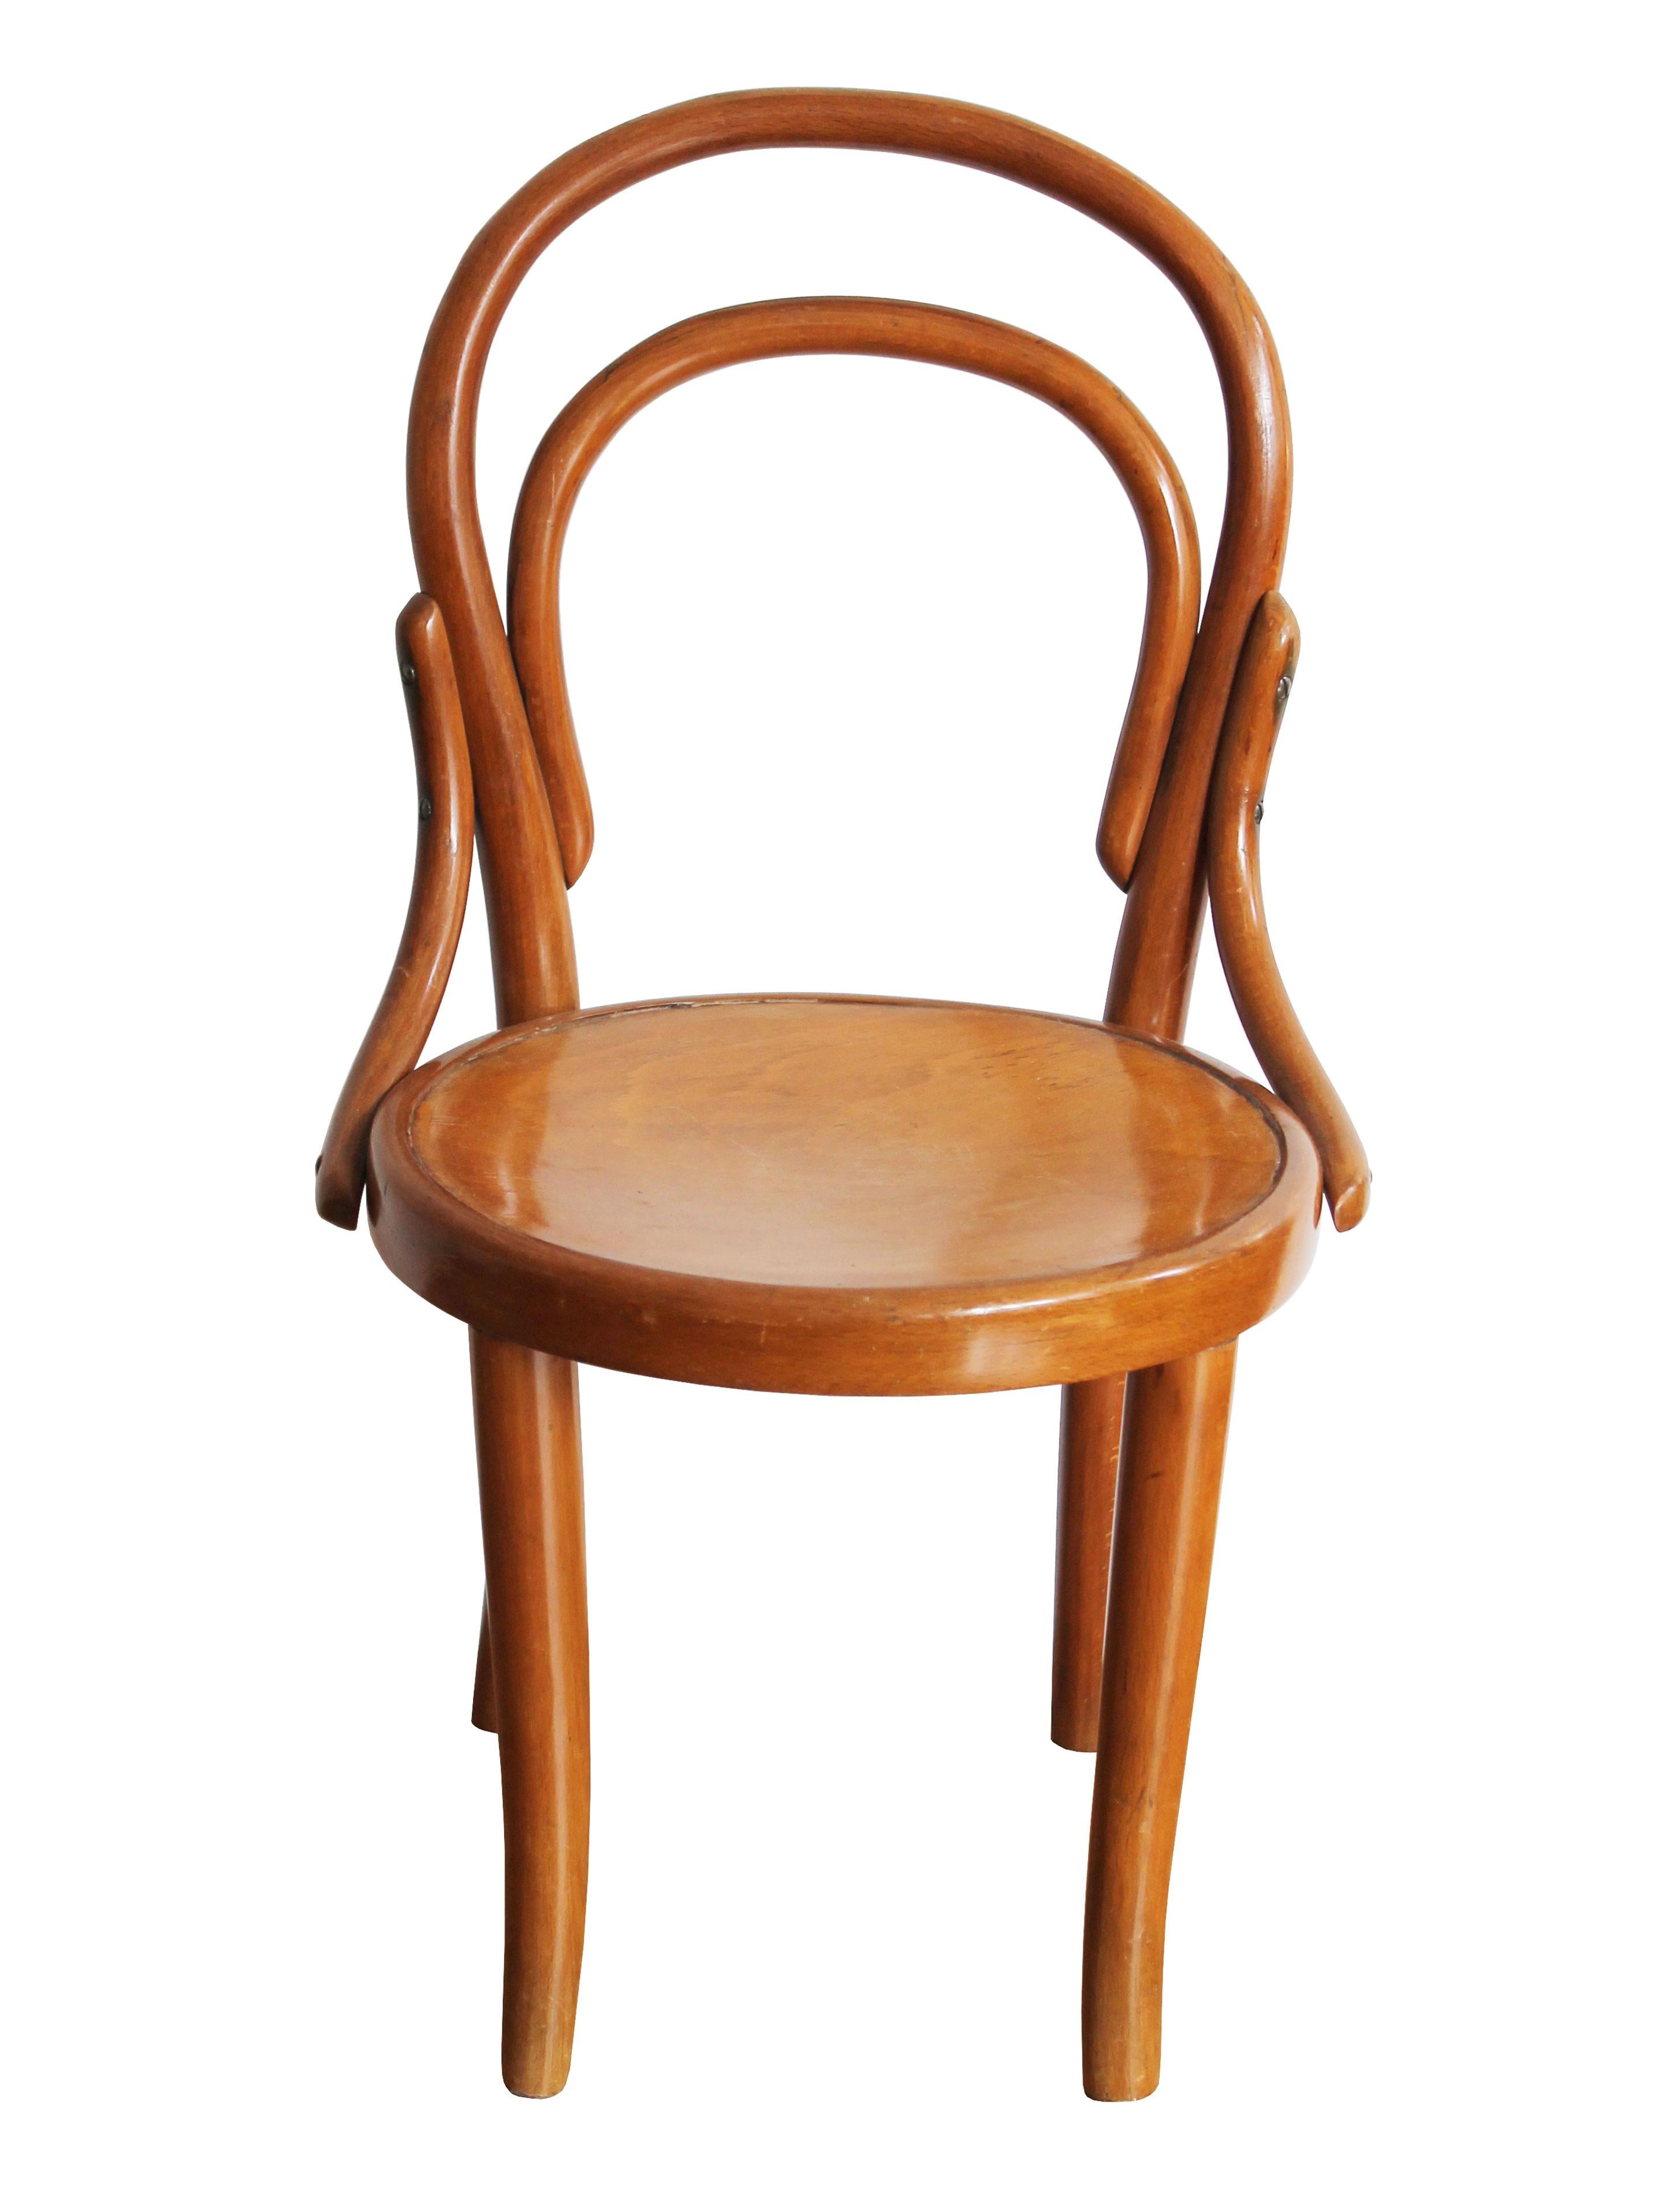 An authentic bentwood kid's chair made at the beginning of the 20th century by the Thonet Furniture company - and known as Chair Model Number 1. Thonet has a great tradition of producing various furniture for children, which can be seen in the